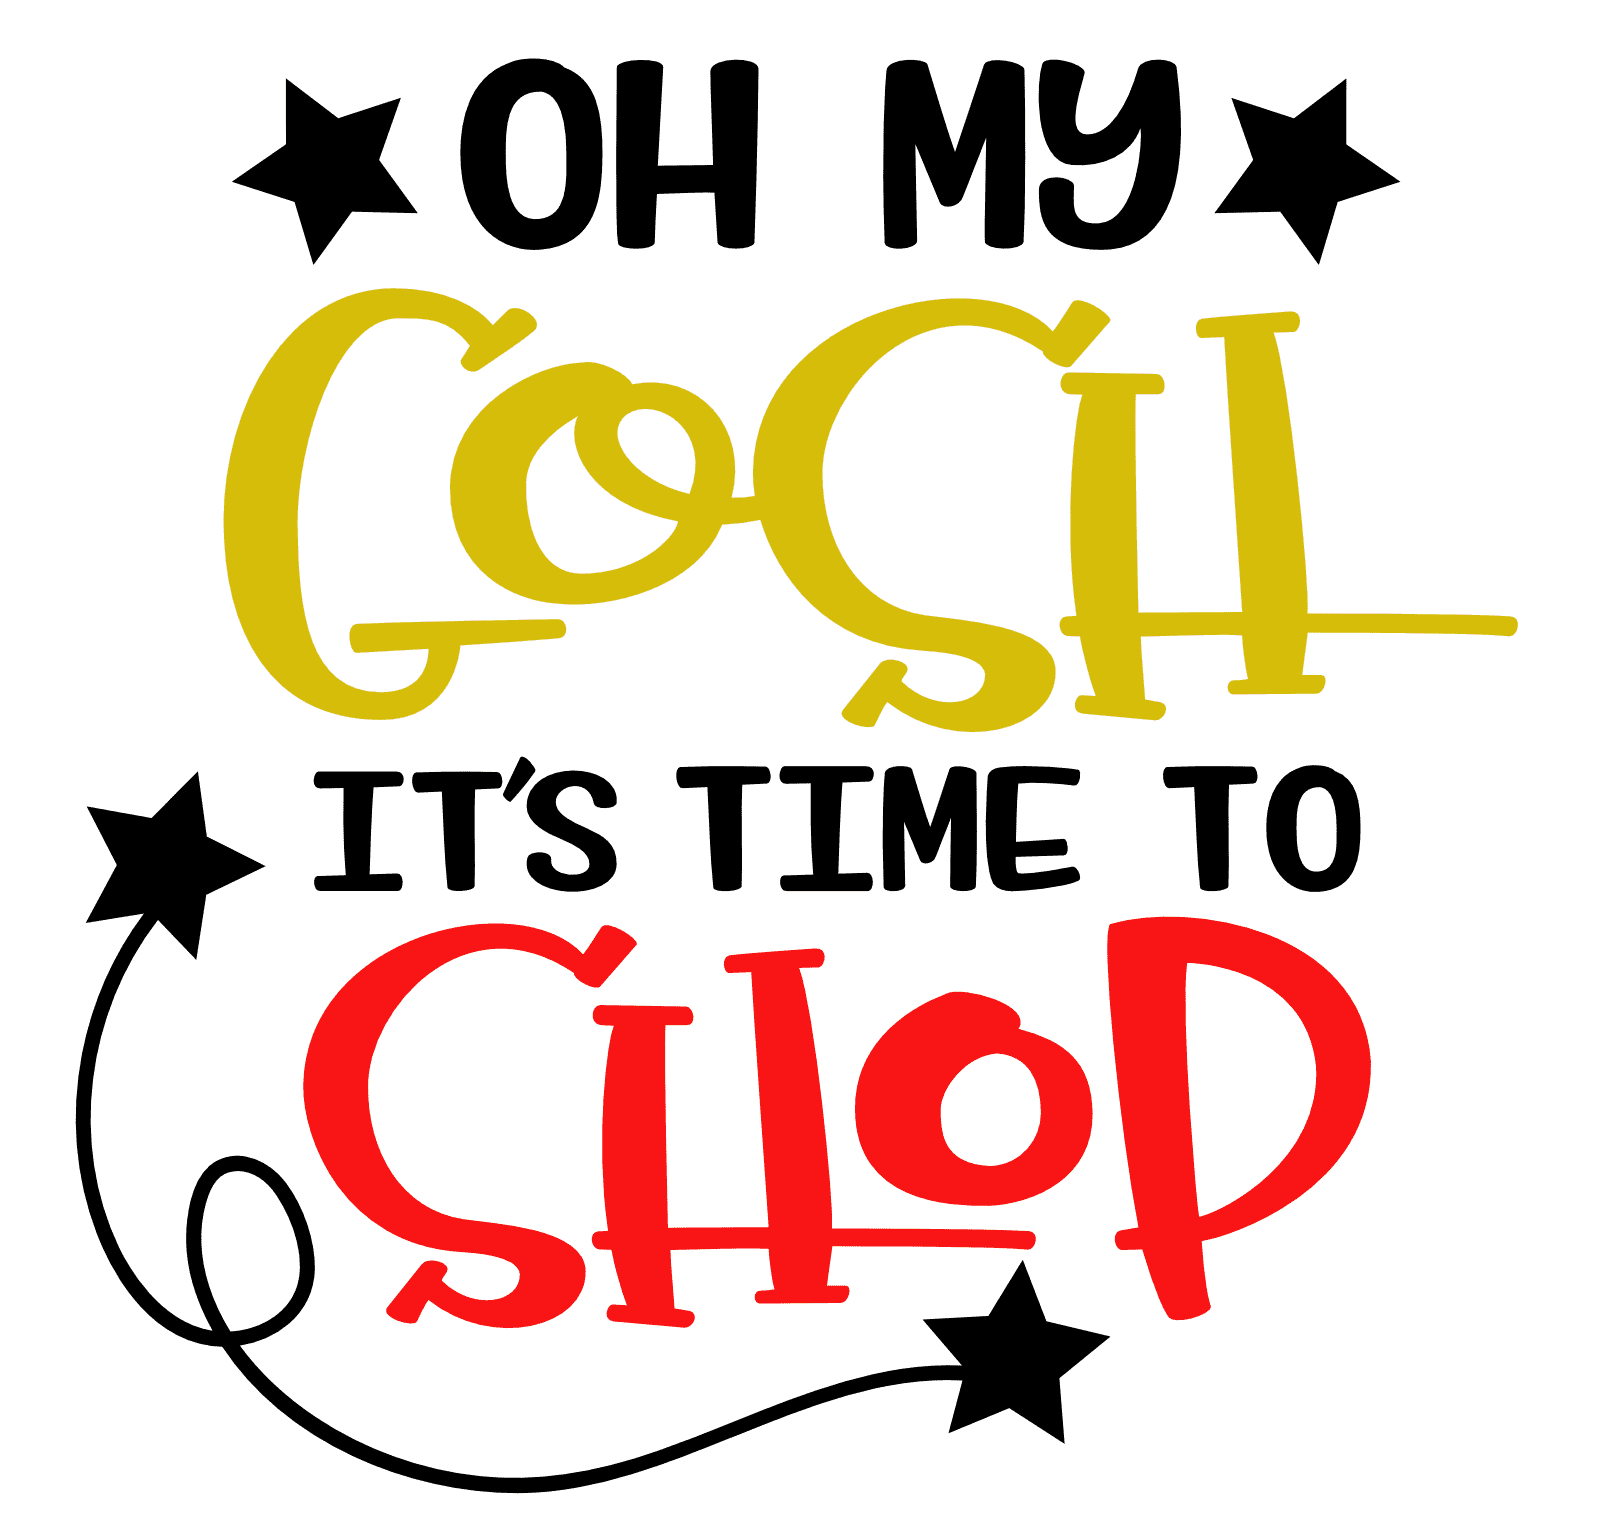 oh-my-gosh-its-time-to-shop-funny-girl-quote-black-friday-free-svg-file-SvgHeart.Com